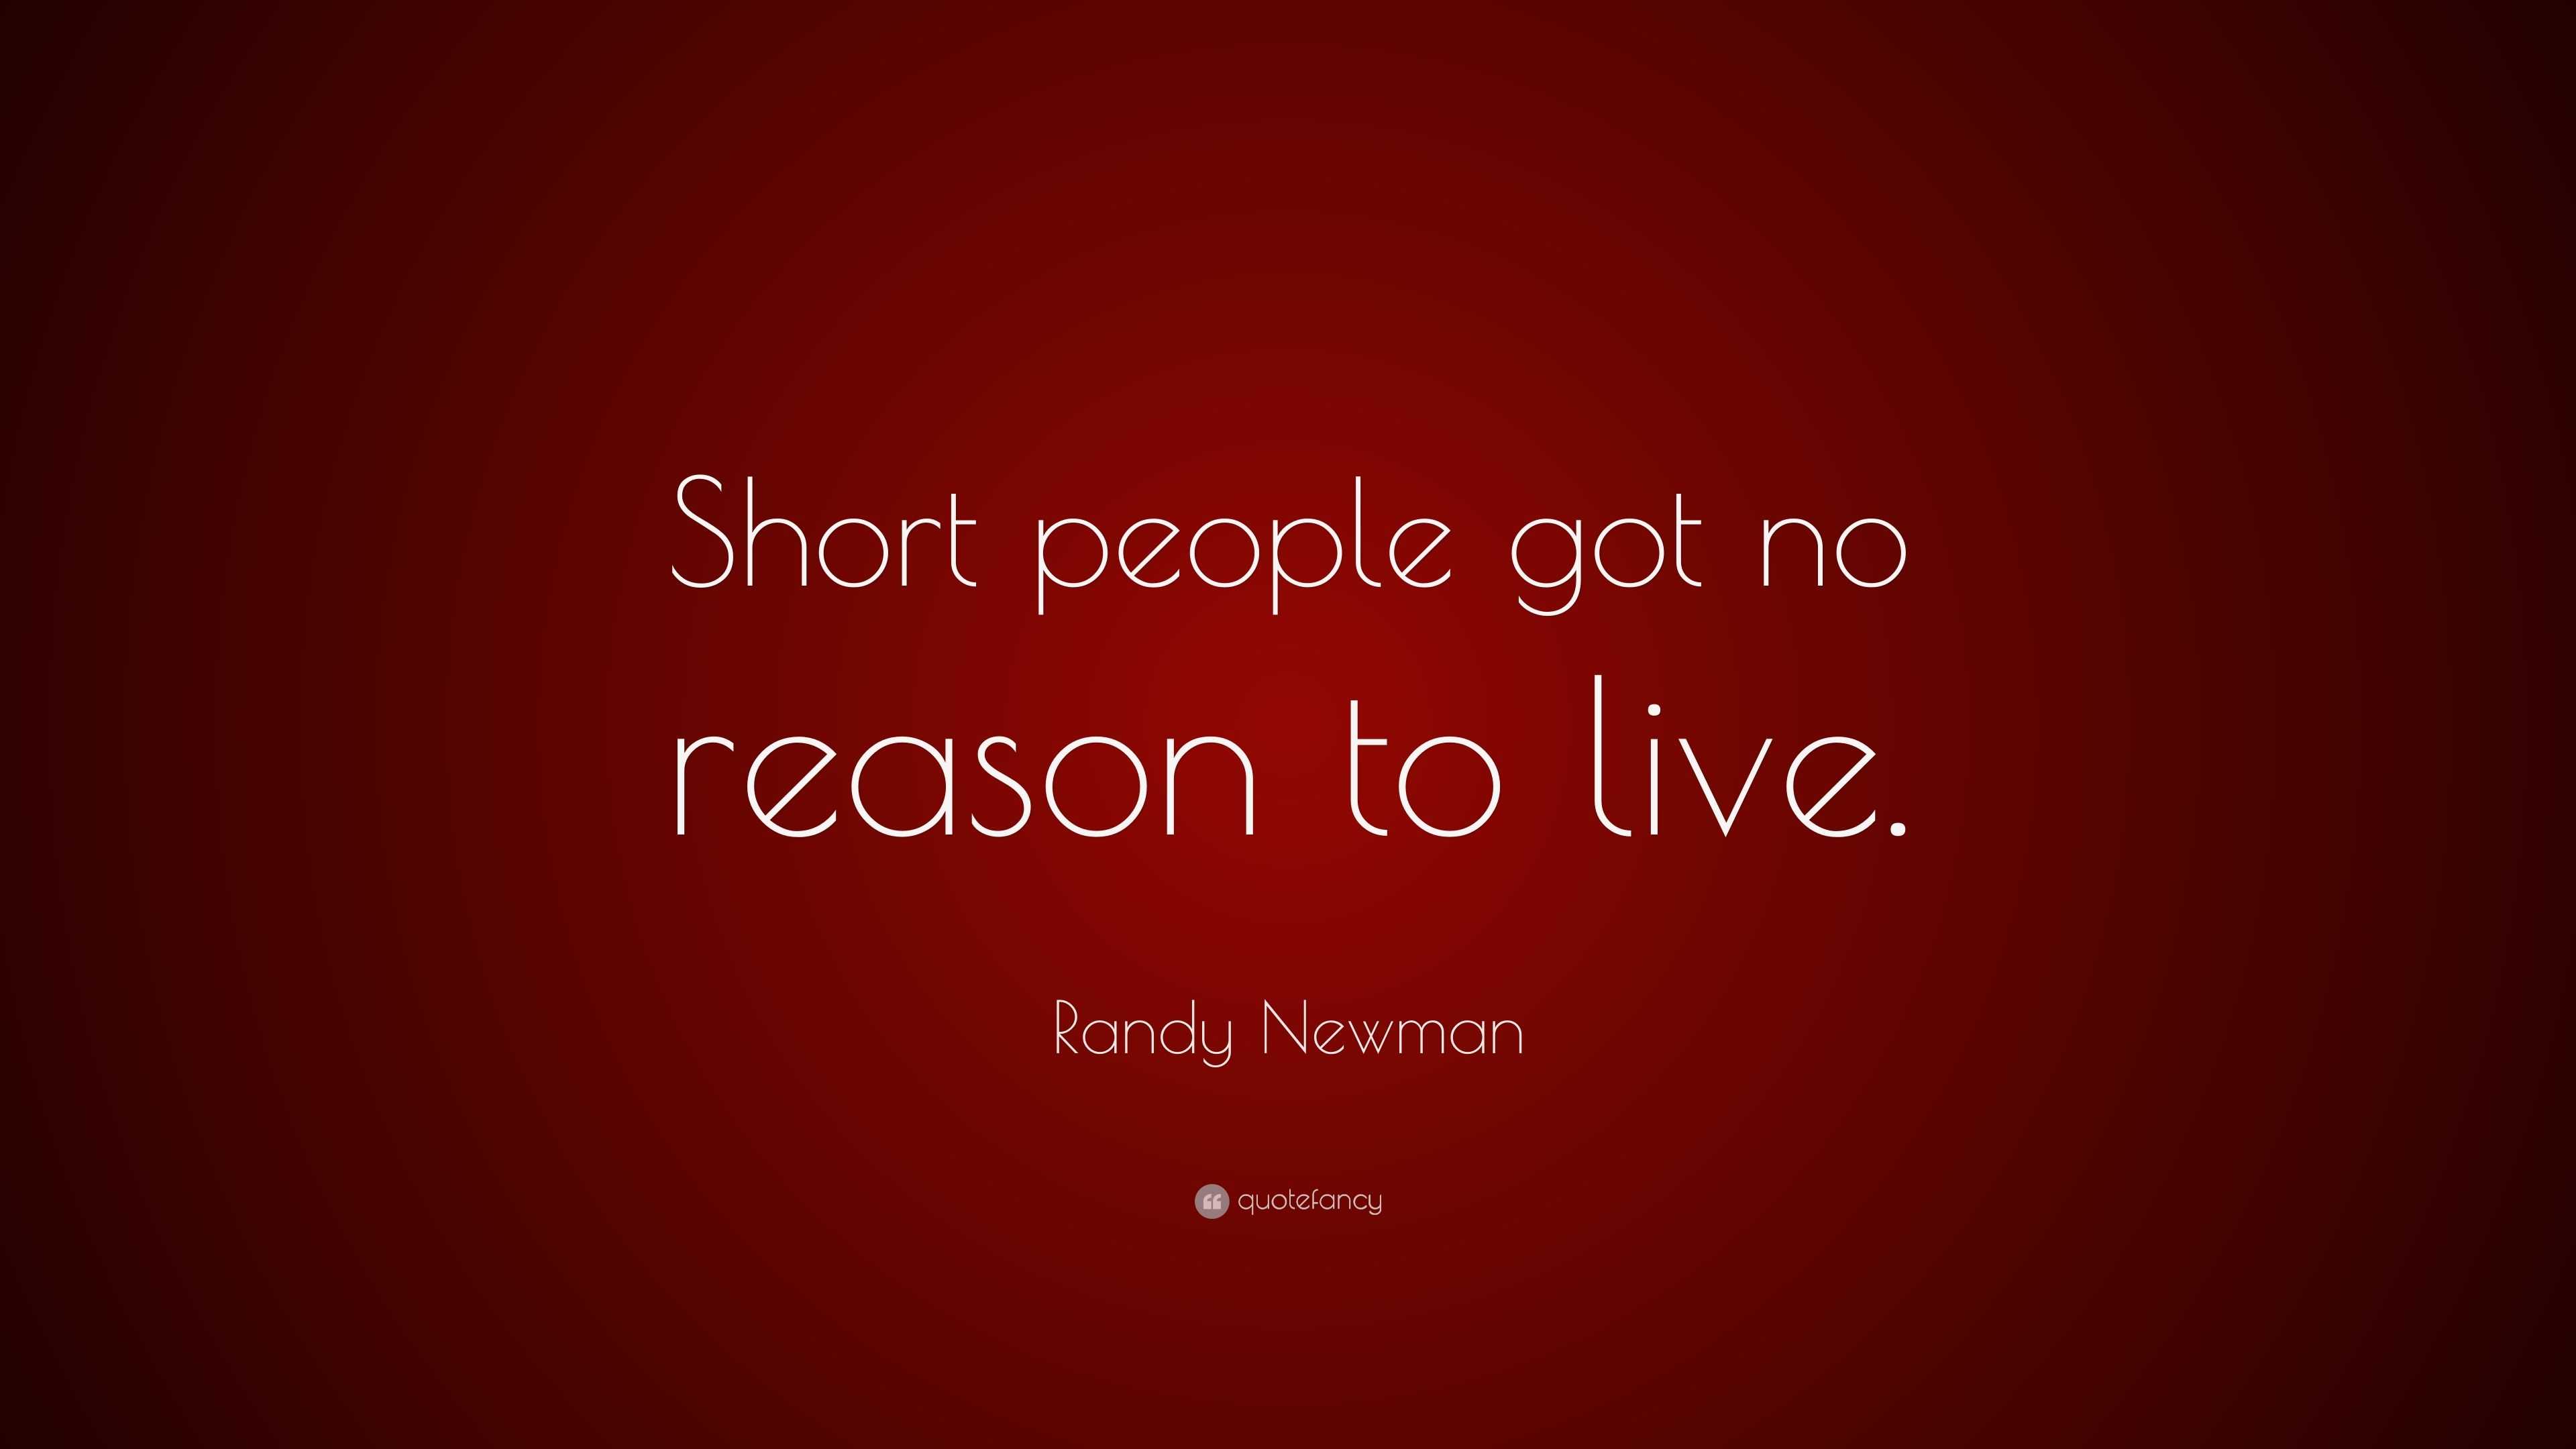 3039037-Randy-Newman-Quote-Short-people-got-no-reason-to-live.jpg